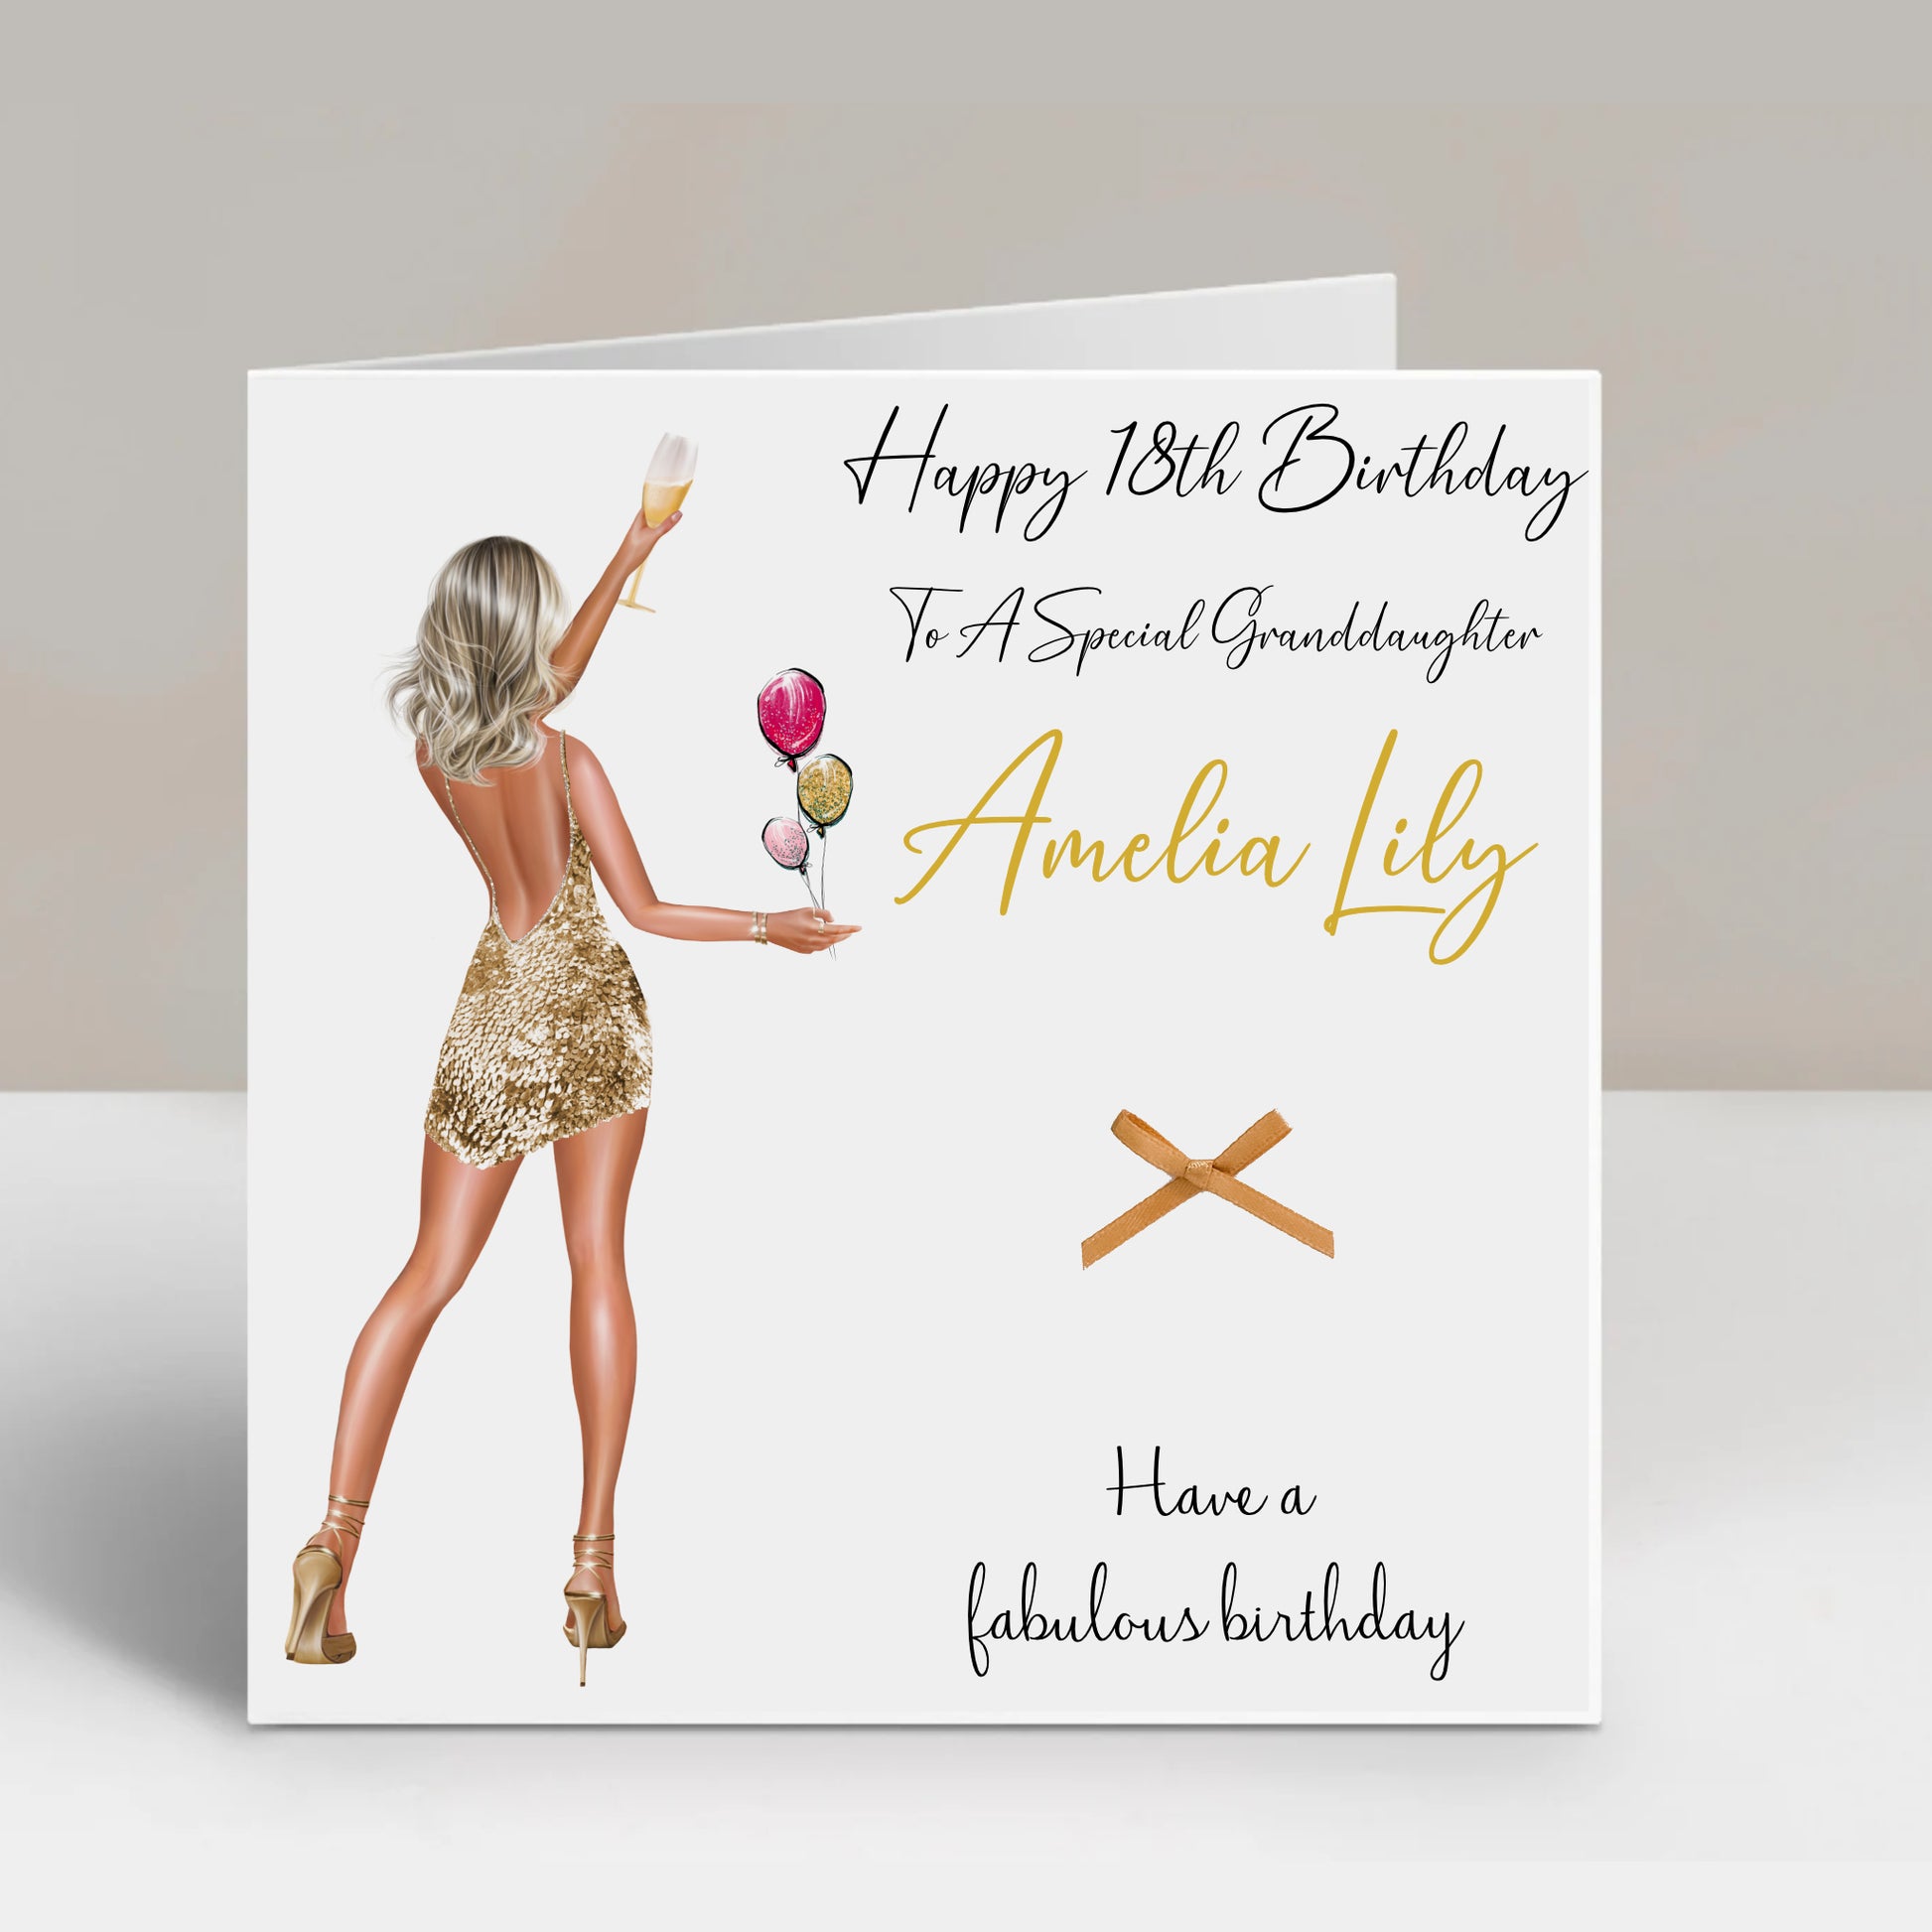 a birthday card for a special granddaughter